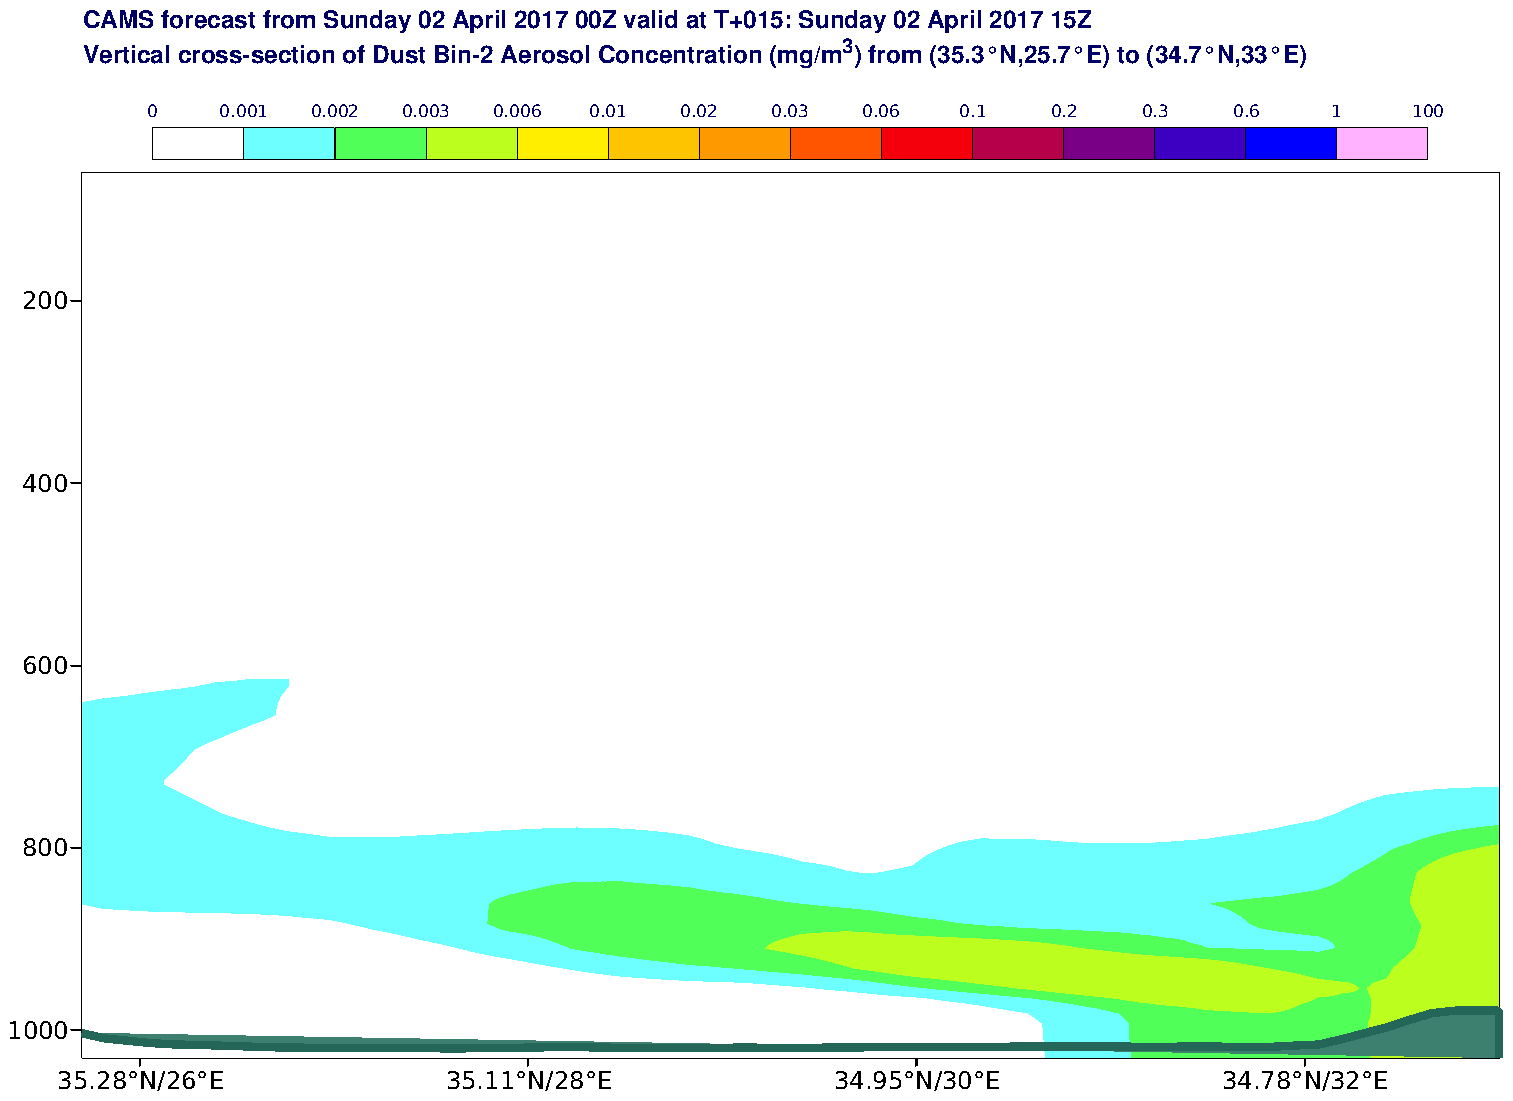 Vertical cross-section of Dust Bin-2 Aerosol Concentration (mg/m3) valid at T15 - 2017-04-02 15:00